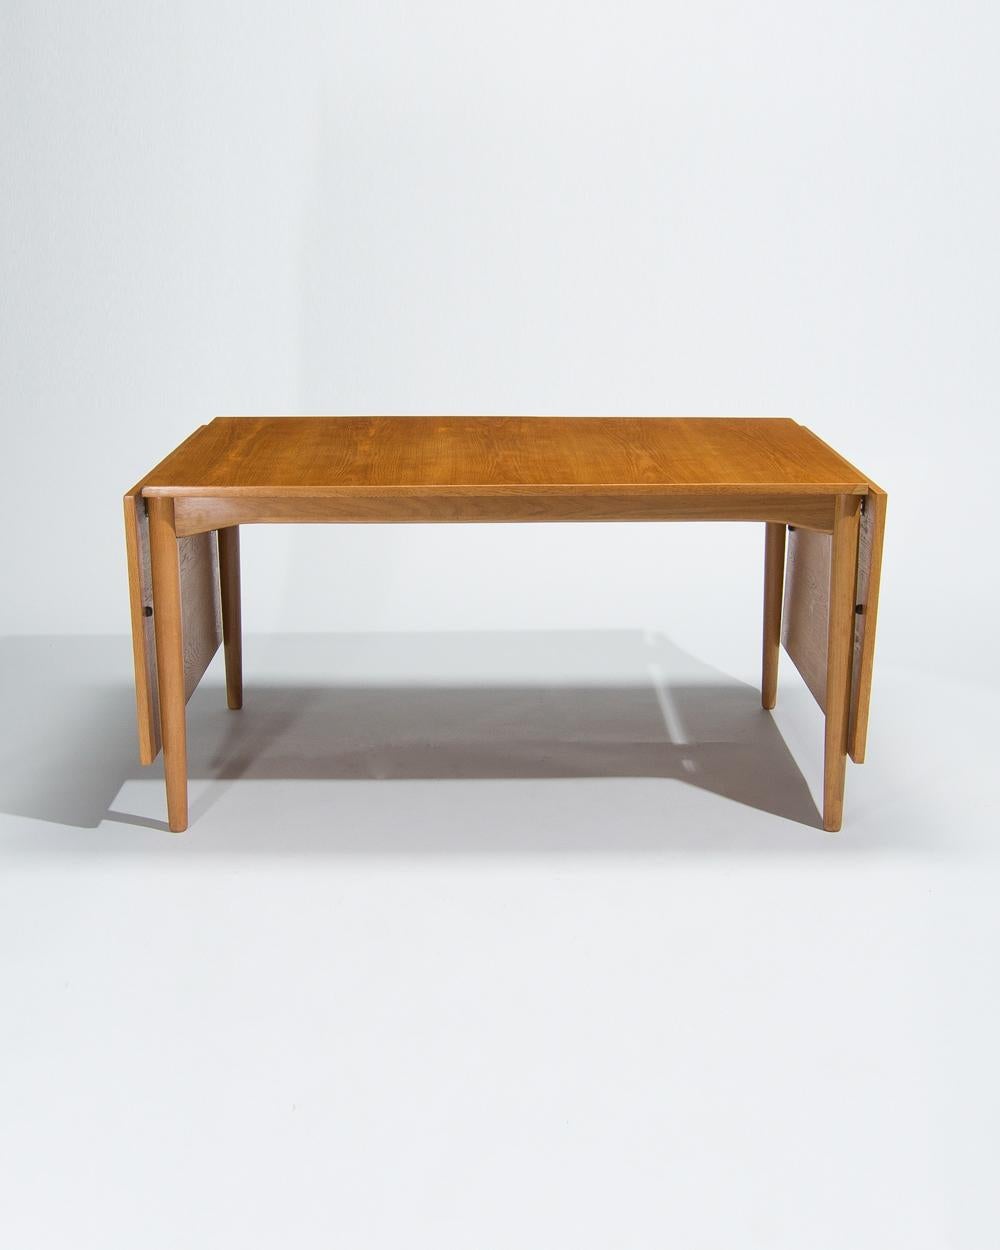 A charming mid century Danish dining table designed by Borge Mogensen for Karl Andersson & Söner.

Made in oak with lovely colour and patina the table features 2 drop down extension leaves so the table can sit 8/10 people. These can easily be